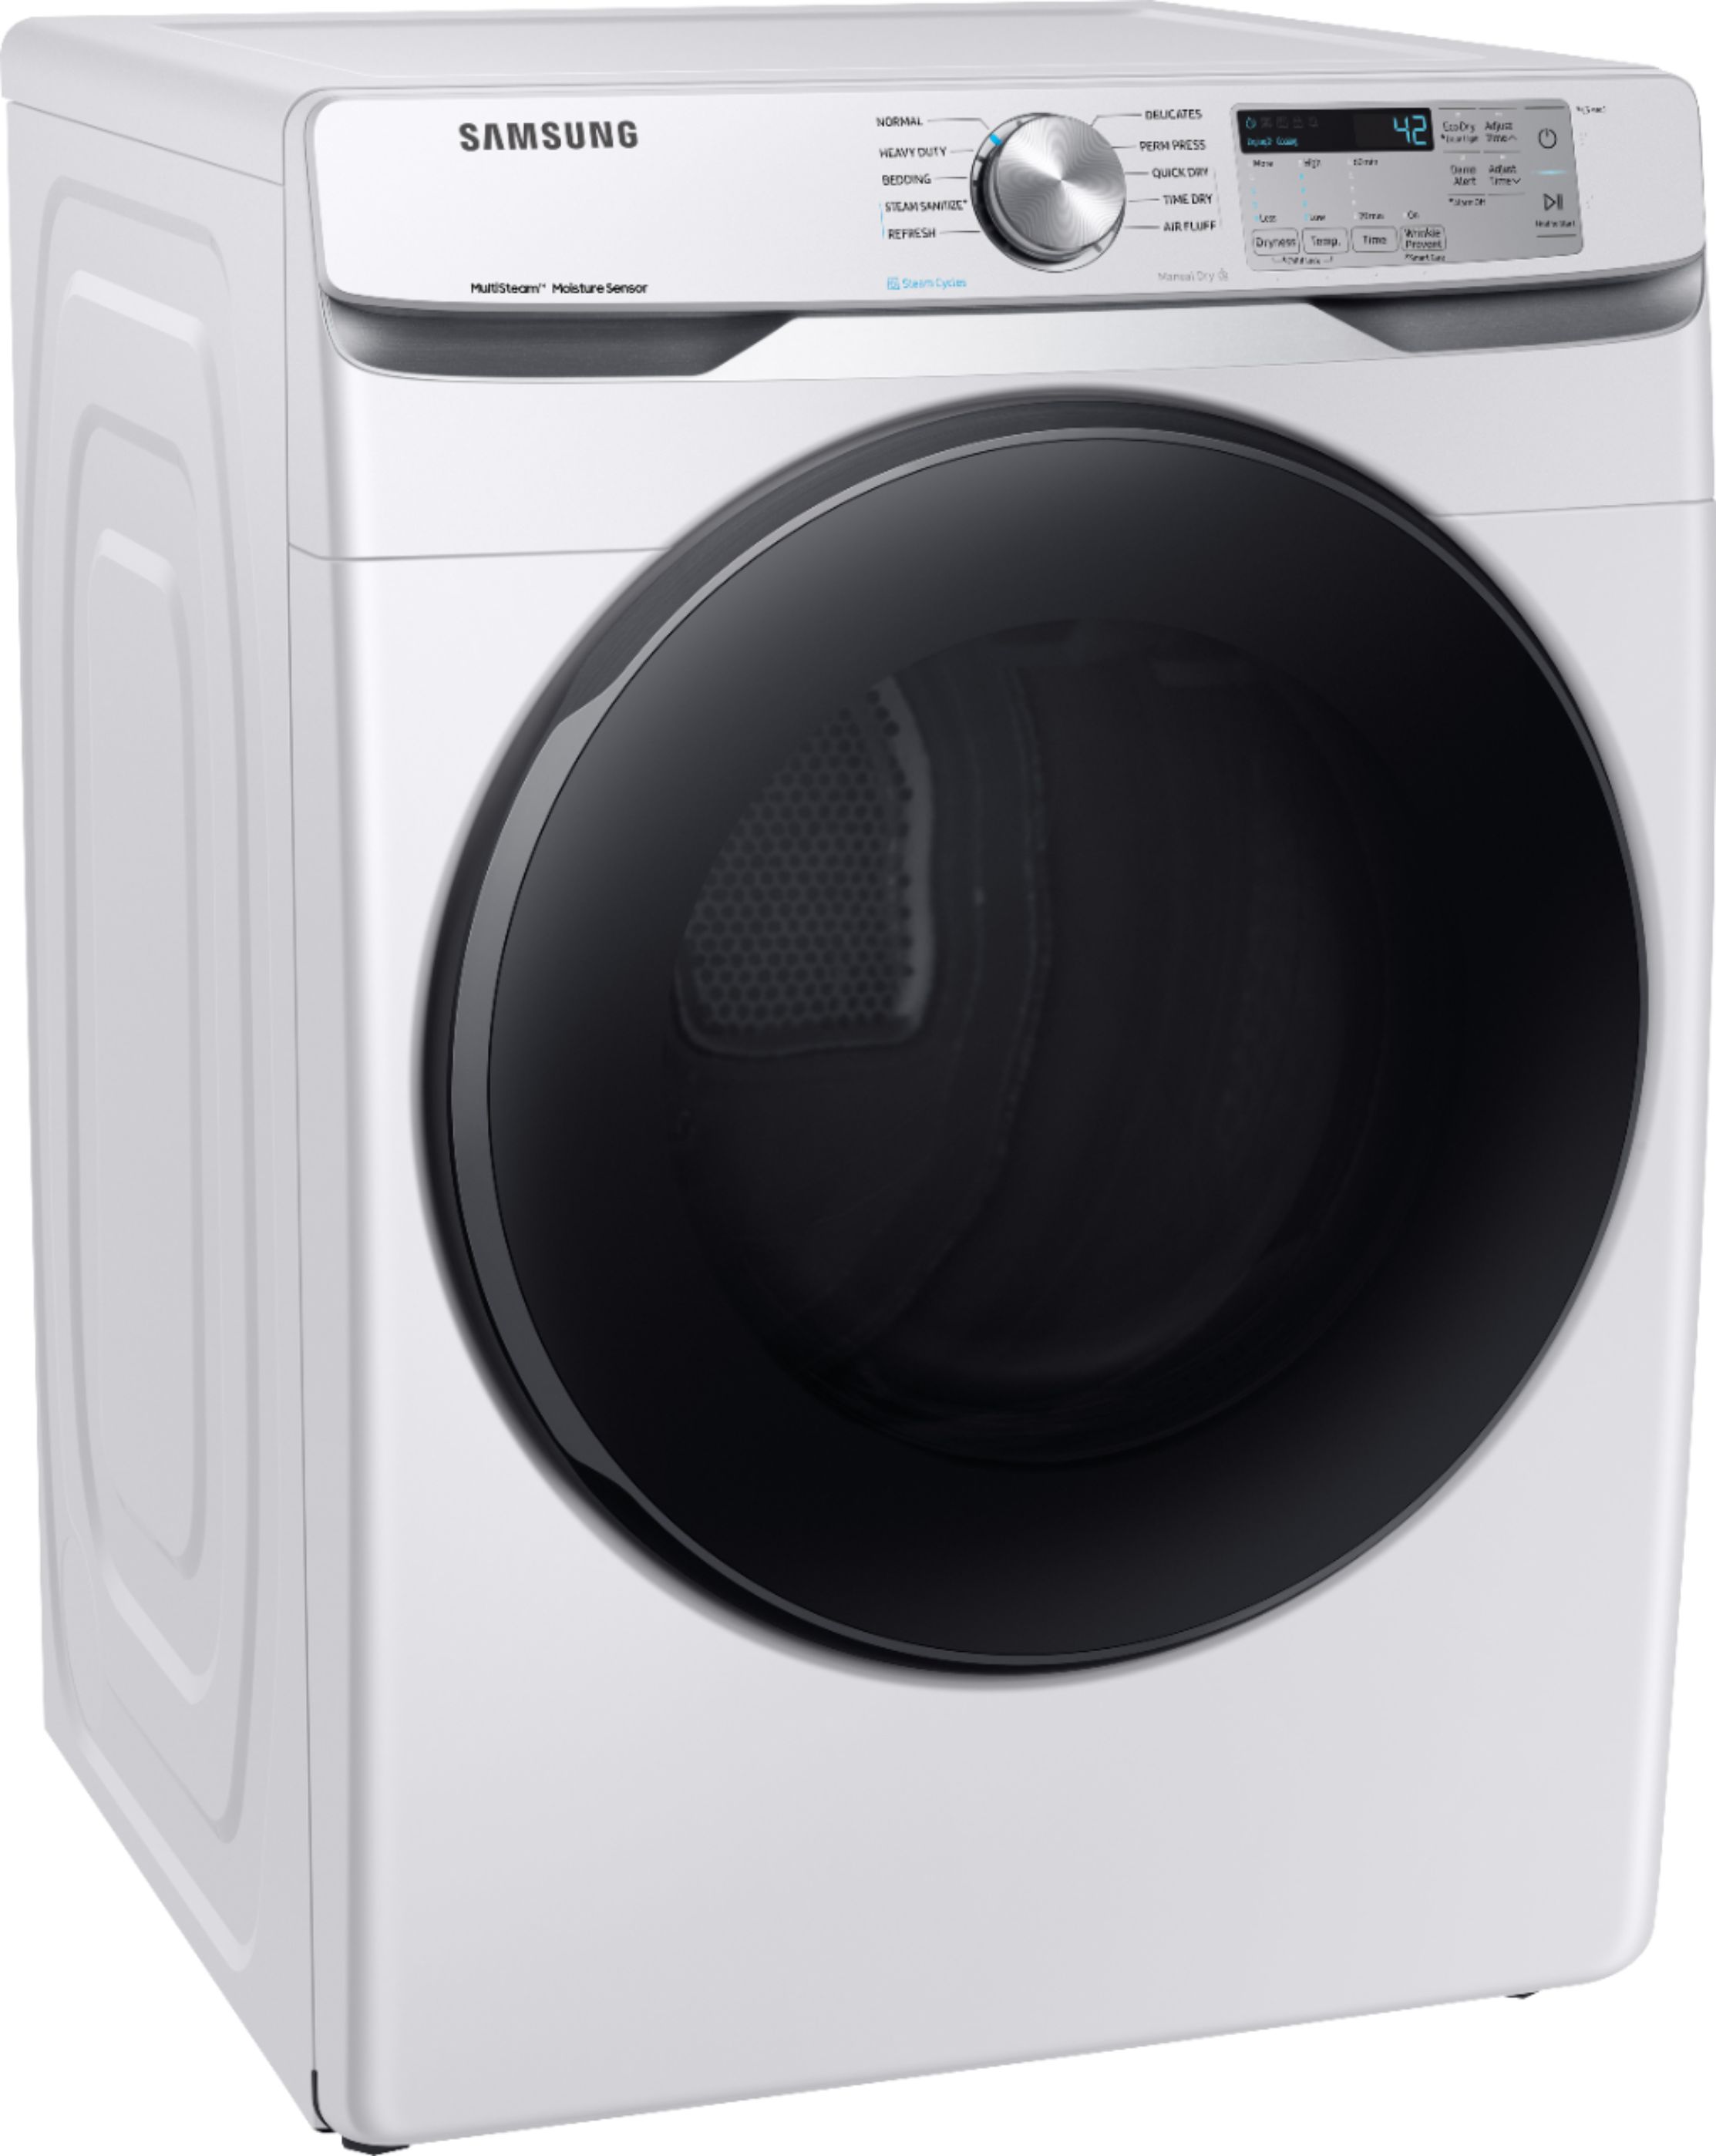 Angle View: Samsung - 7.5 Cu. Ft. Gas Dryer with Steam and FlexDry - White